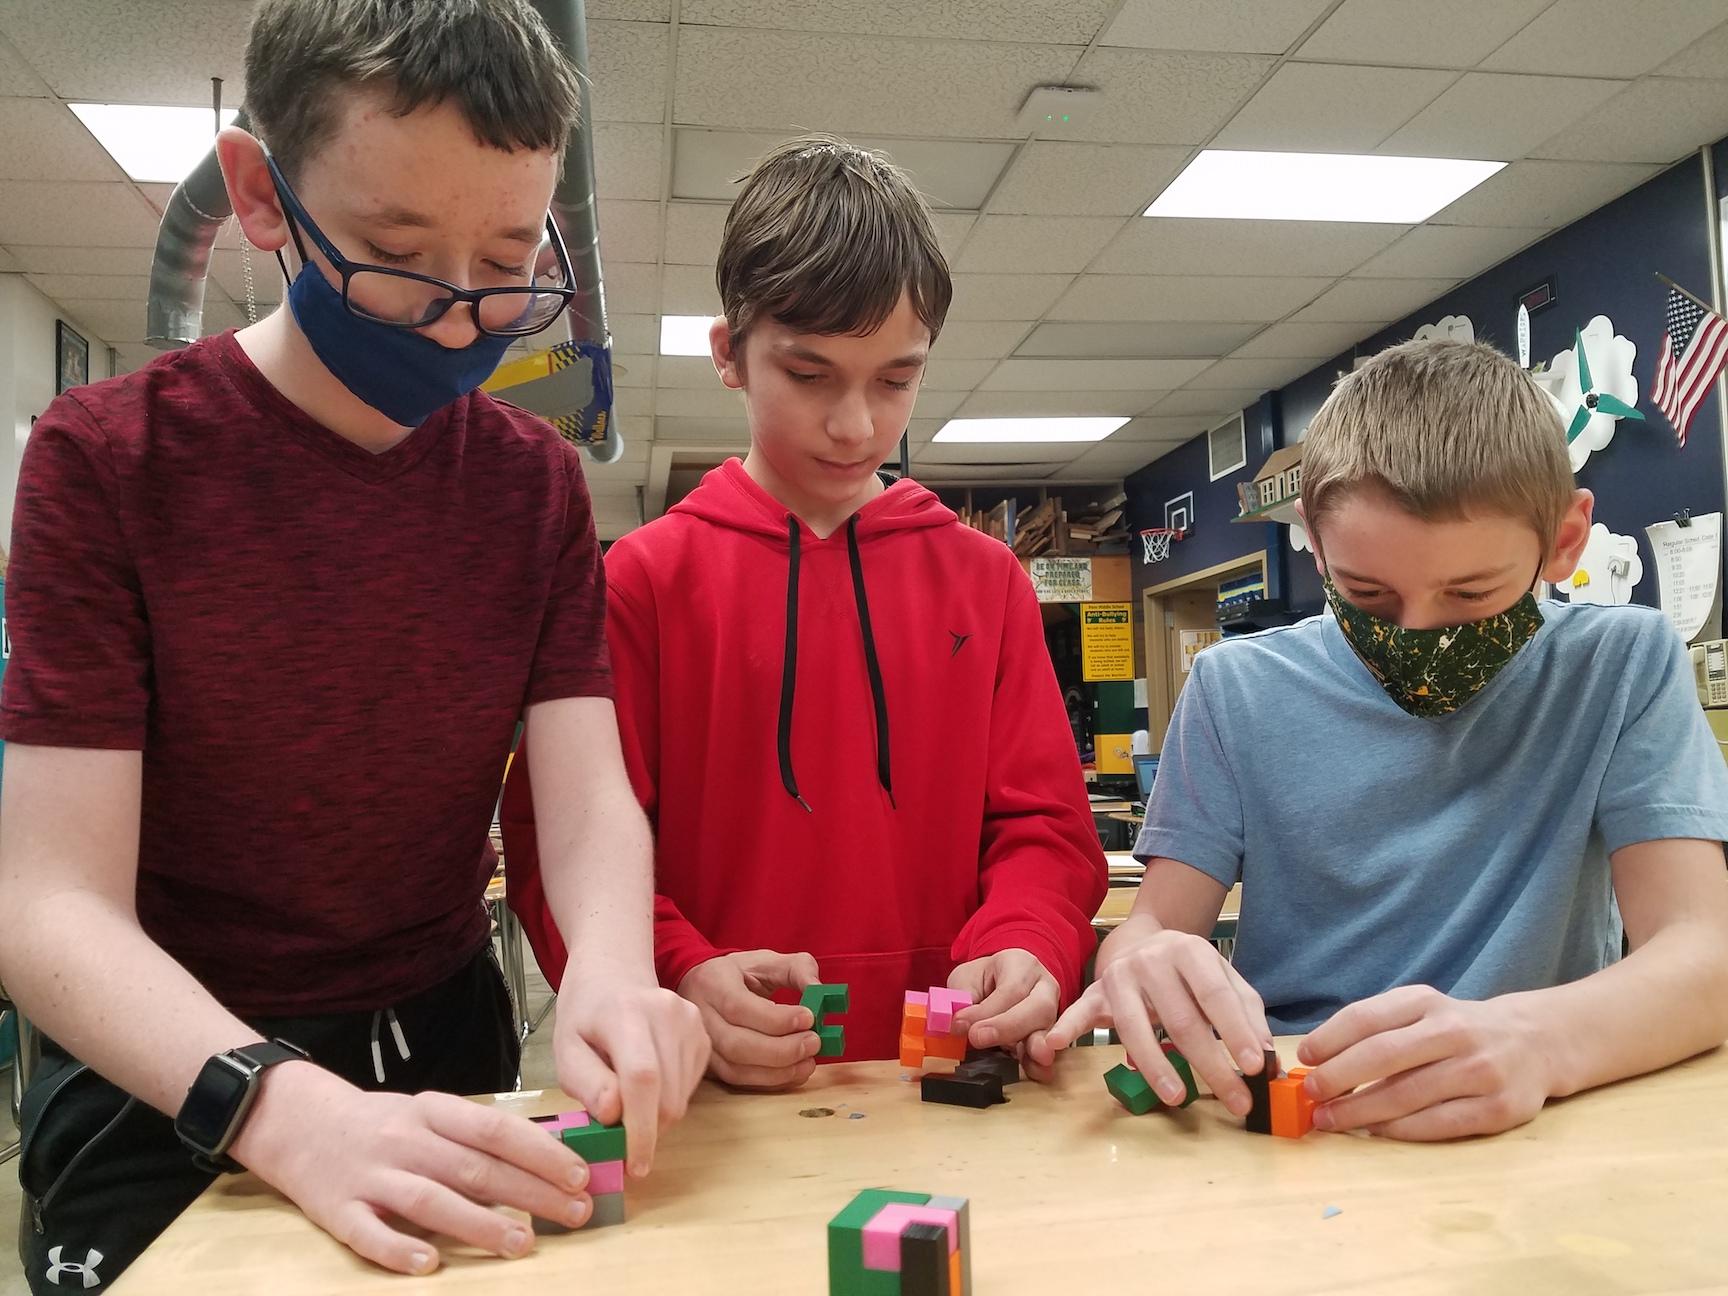 Andrew Baker, Jason Whitefield, and Collin Dransart perform a final fit of their 3-D printed puzzles